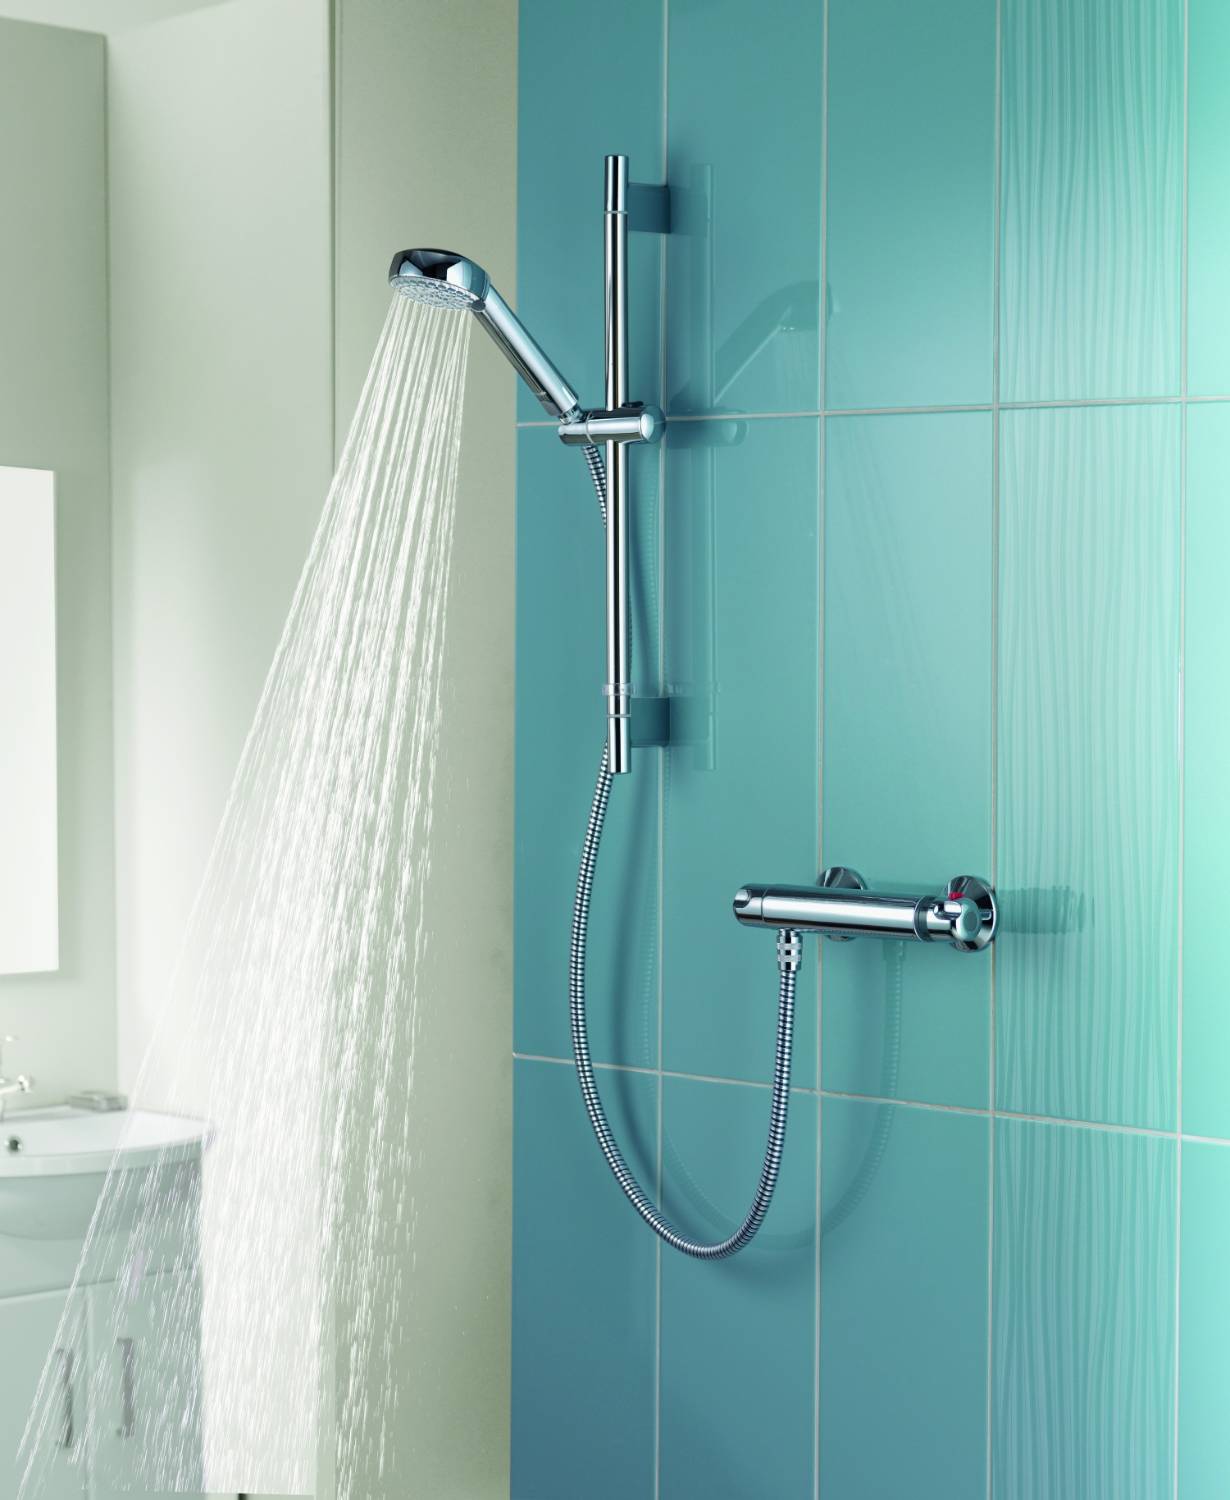 Midas™ 100- Exposed Bar Mixer Shower with Adjustable Head